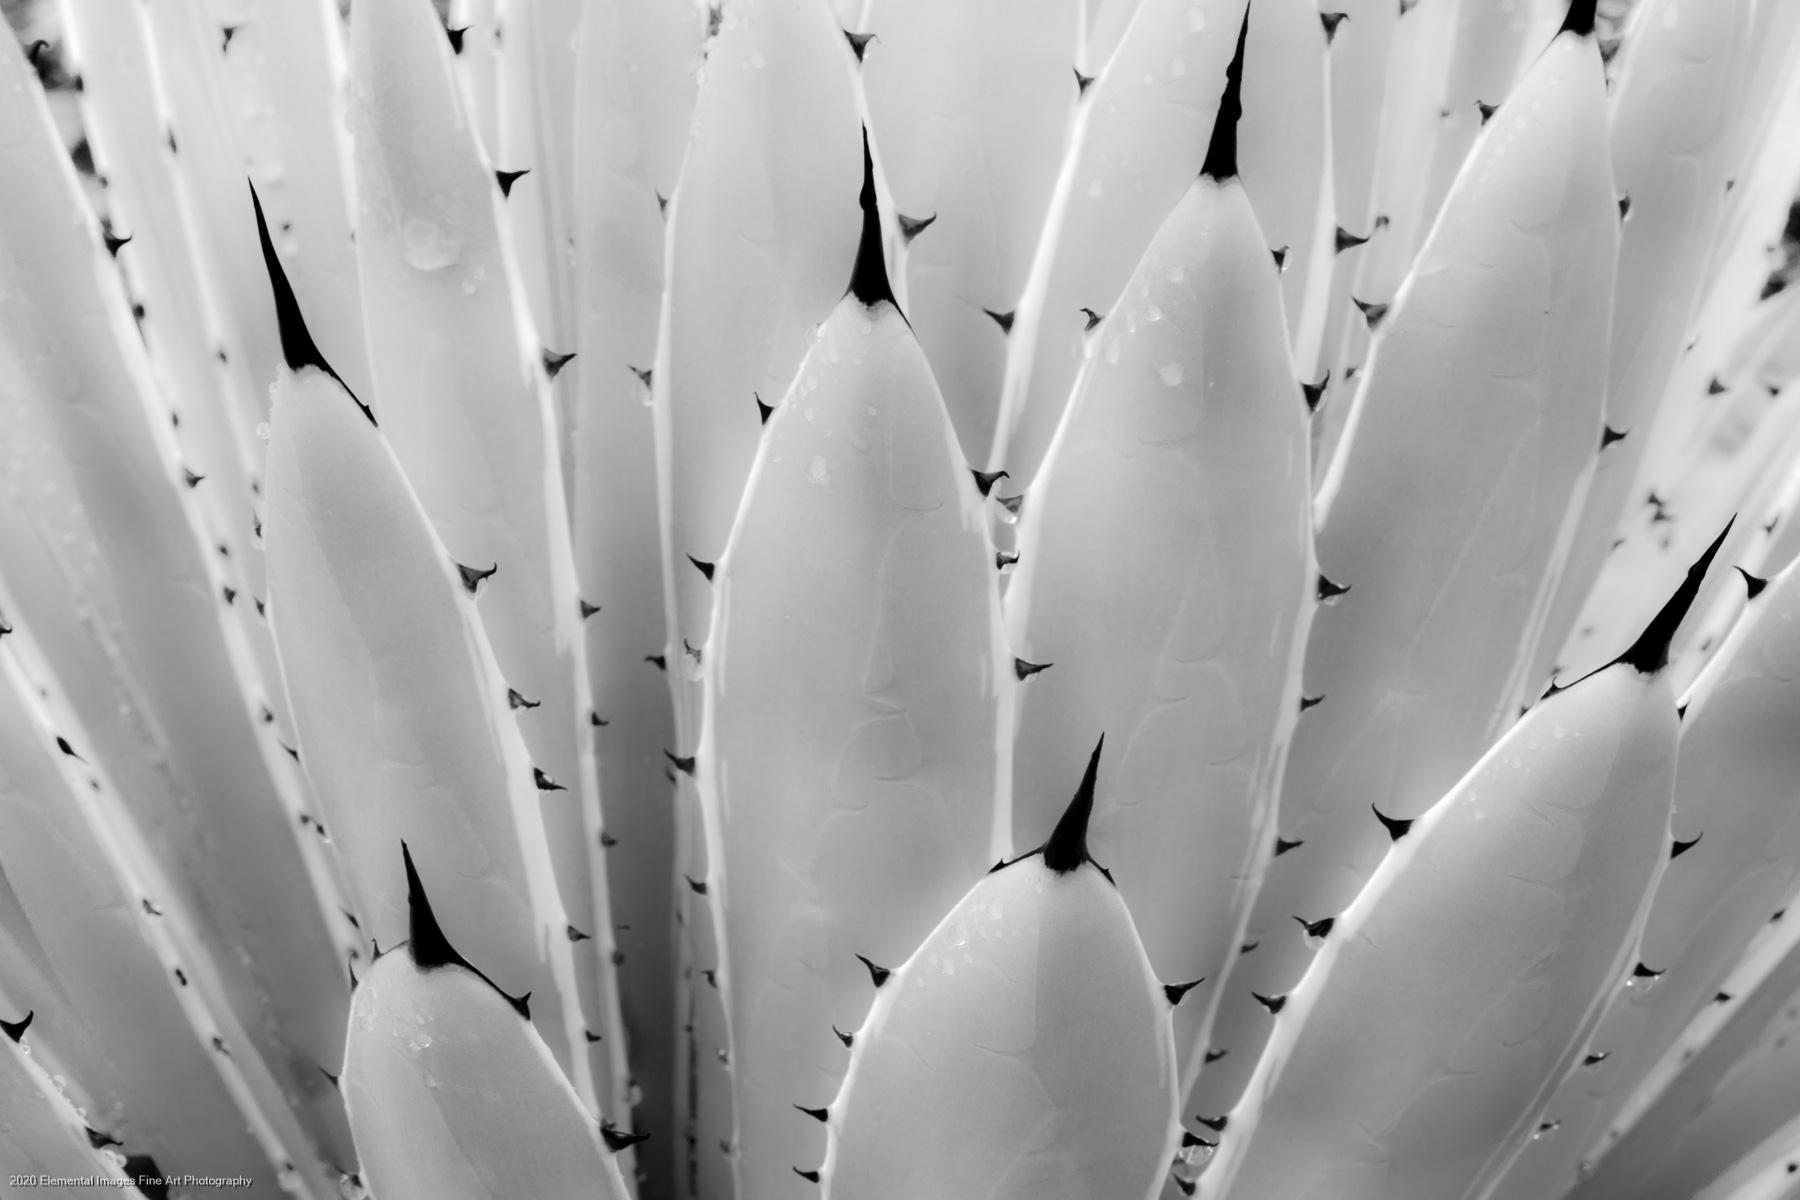 Agaves #24 | San Marino | CA |  - © 2020 Elemental Images Fine Art Photography - All Rights Reserved Worldwide